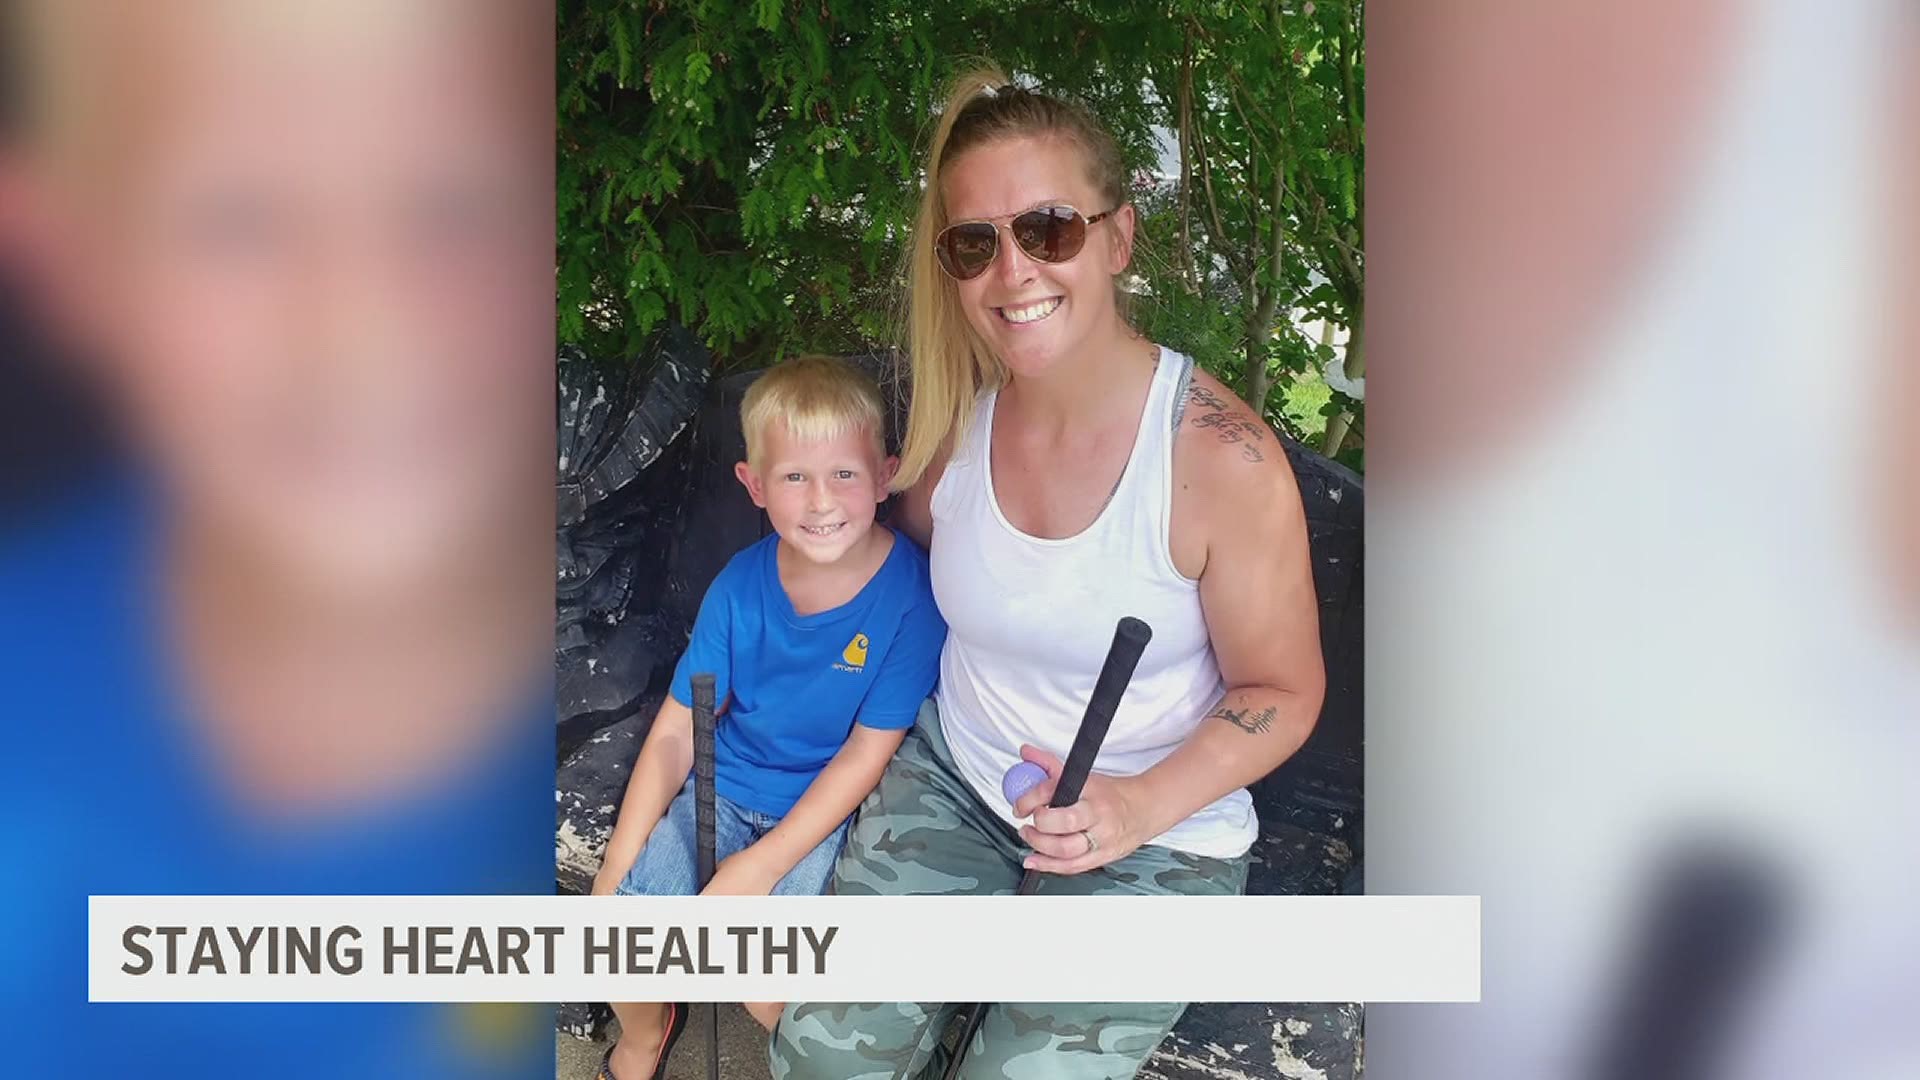 A mom of two young boys and 33 at the time, Heather Elliot said it was like any other day, getting ready for work and trying to get the boys off to school.